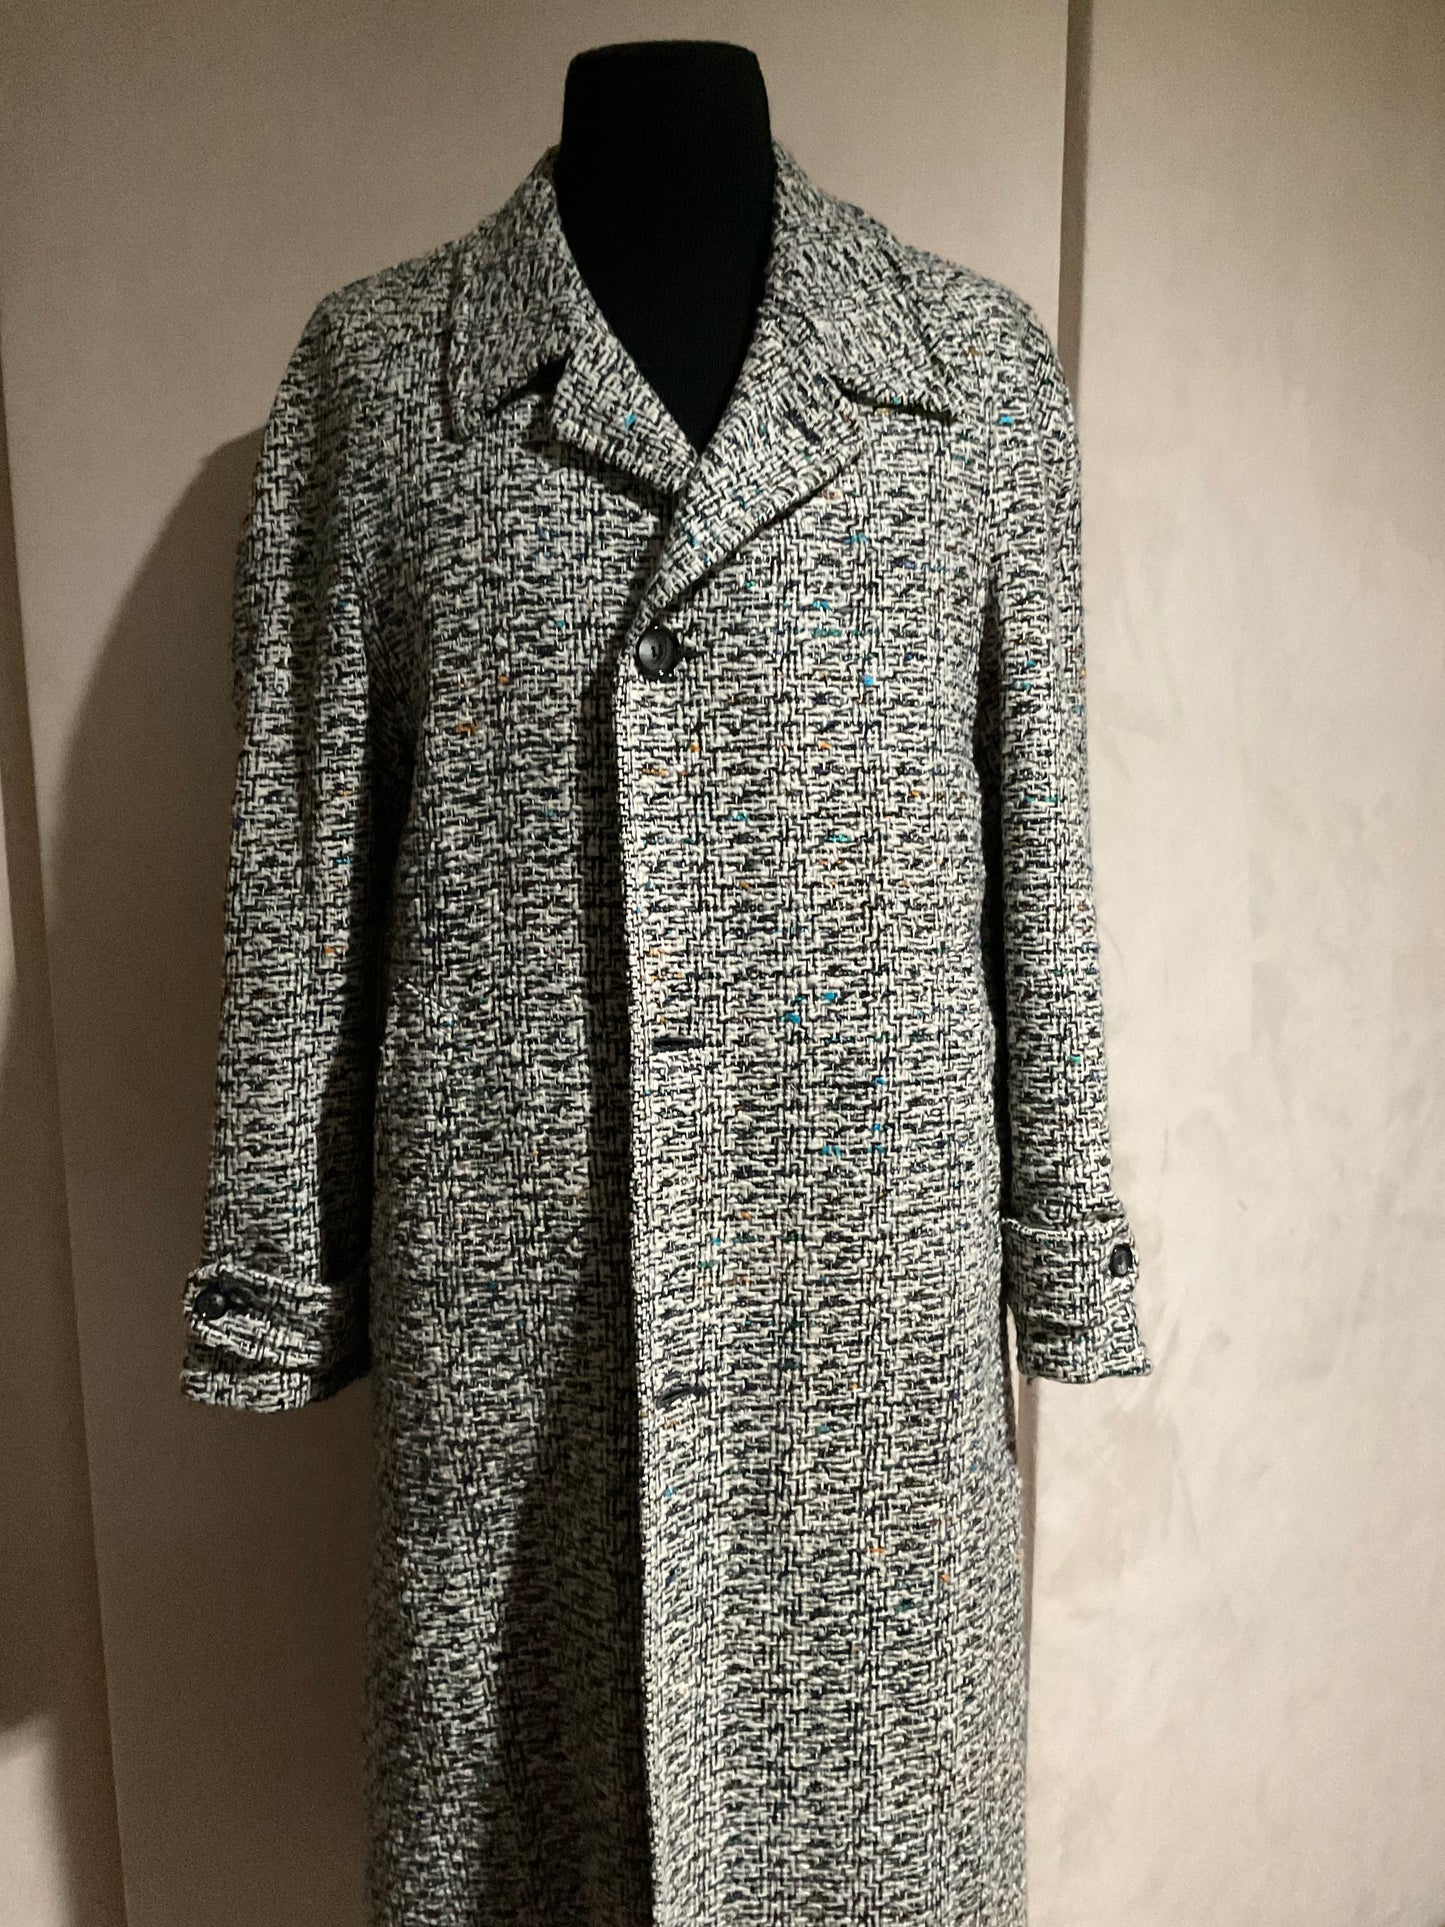 R P OVERCOAT / MULTI COLOR VINTAGE TWEED / MADE IN ENGLAND / NEW / 40 / 42